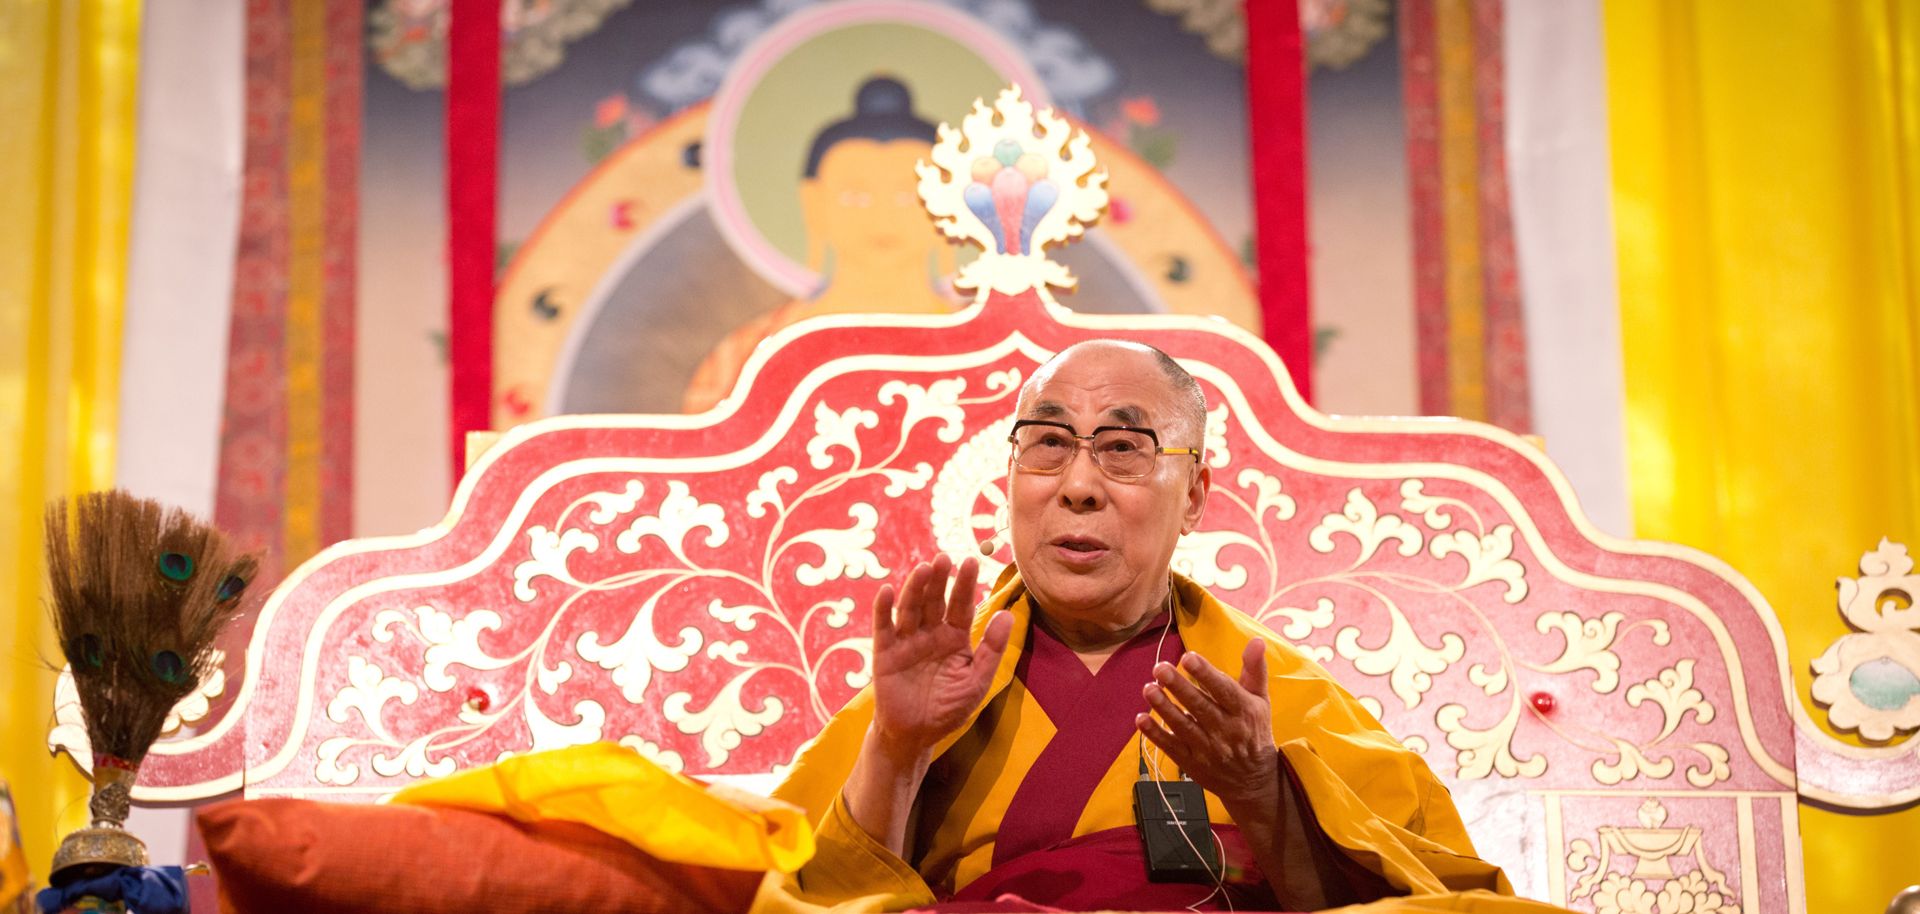 The Dalai Lama's Succession Plans Could Move Beijing to Talks